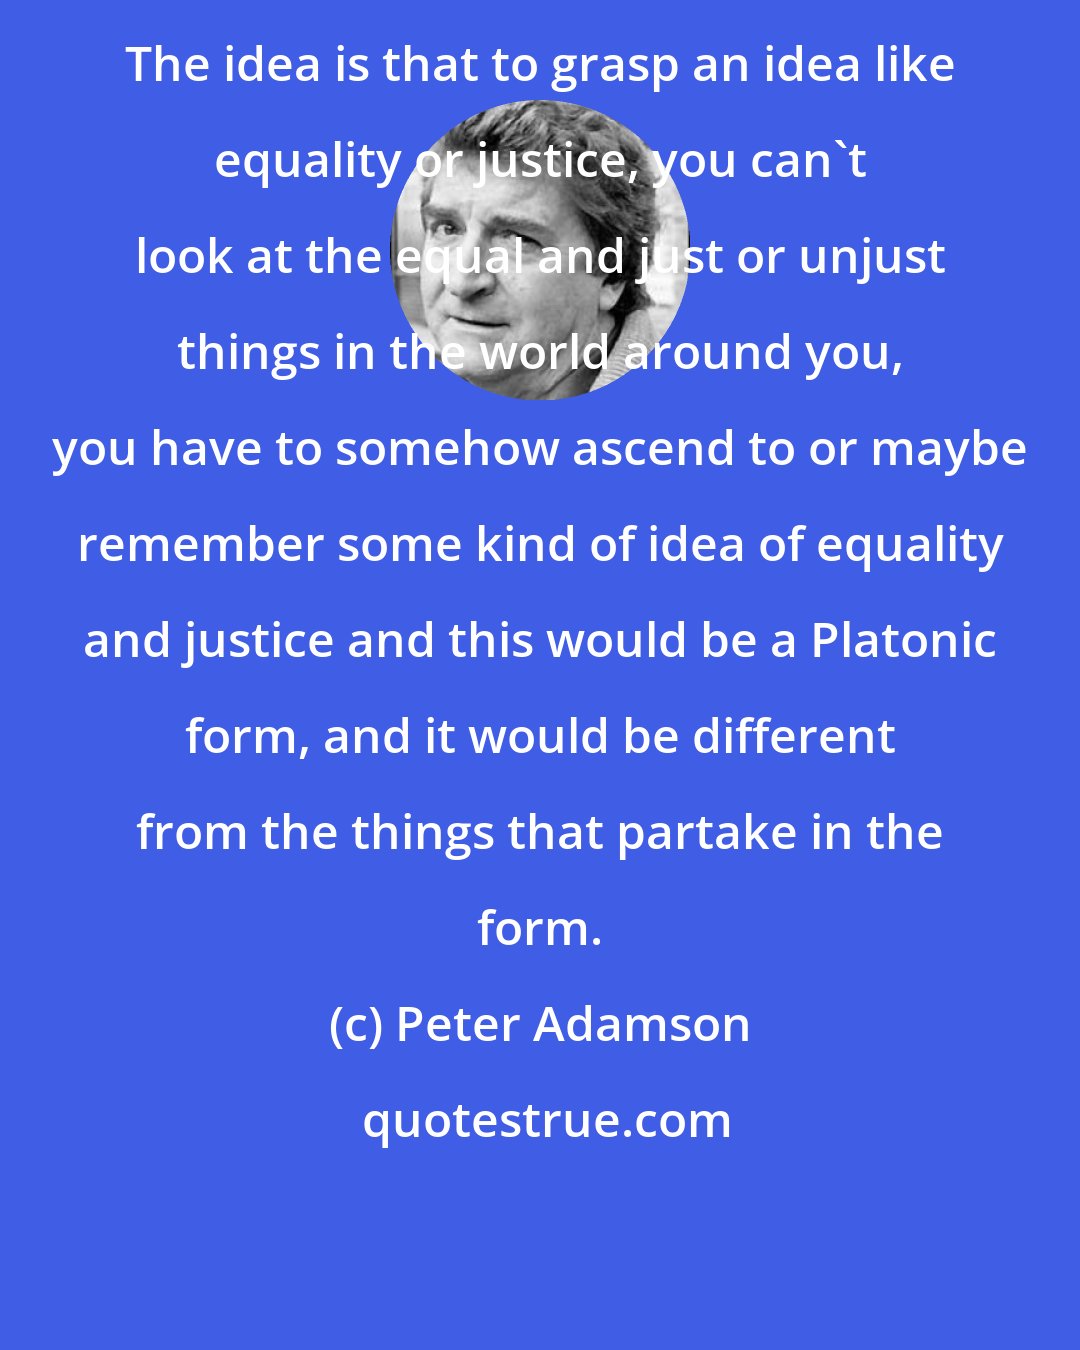 Peter Adamson: The idea is that to grasp an idea like equality or justice, you can't look at the equal and just or unjust things in the world around you, you have to somehow ascend to or maybe remember some kind of idea of equality and justice and this would be a Platonic form, and it would be different from the things that partake in the form.